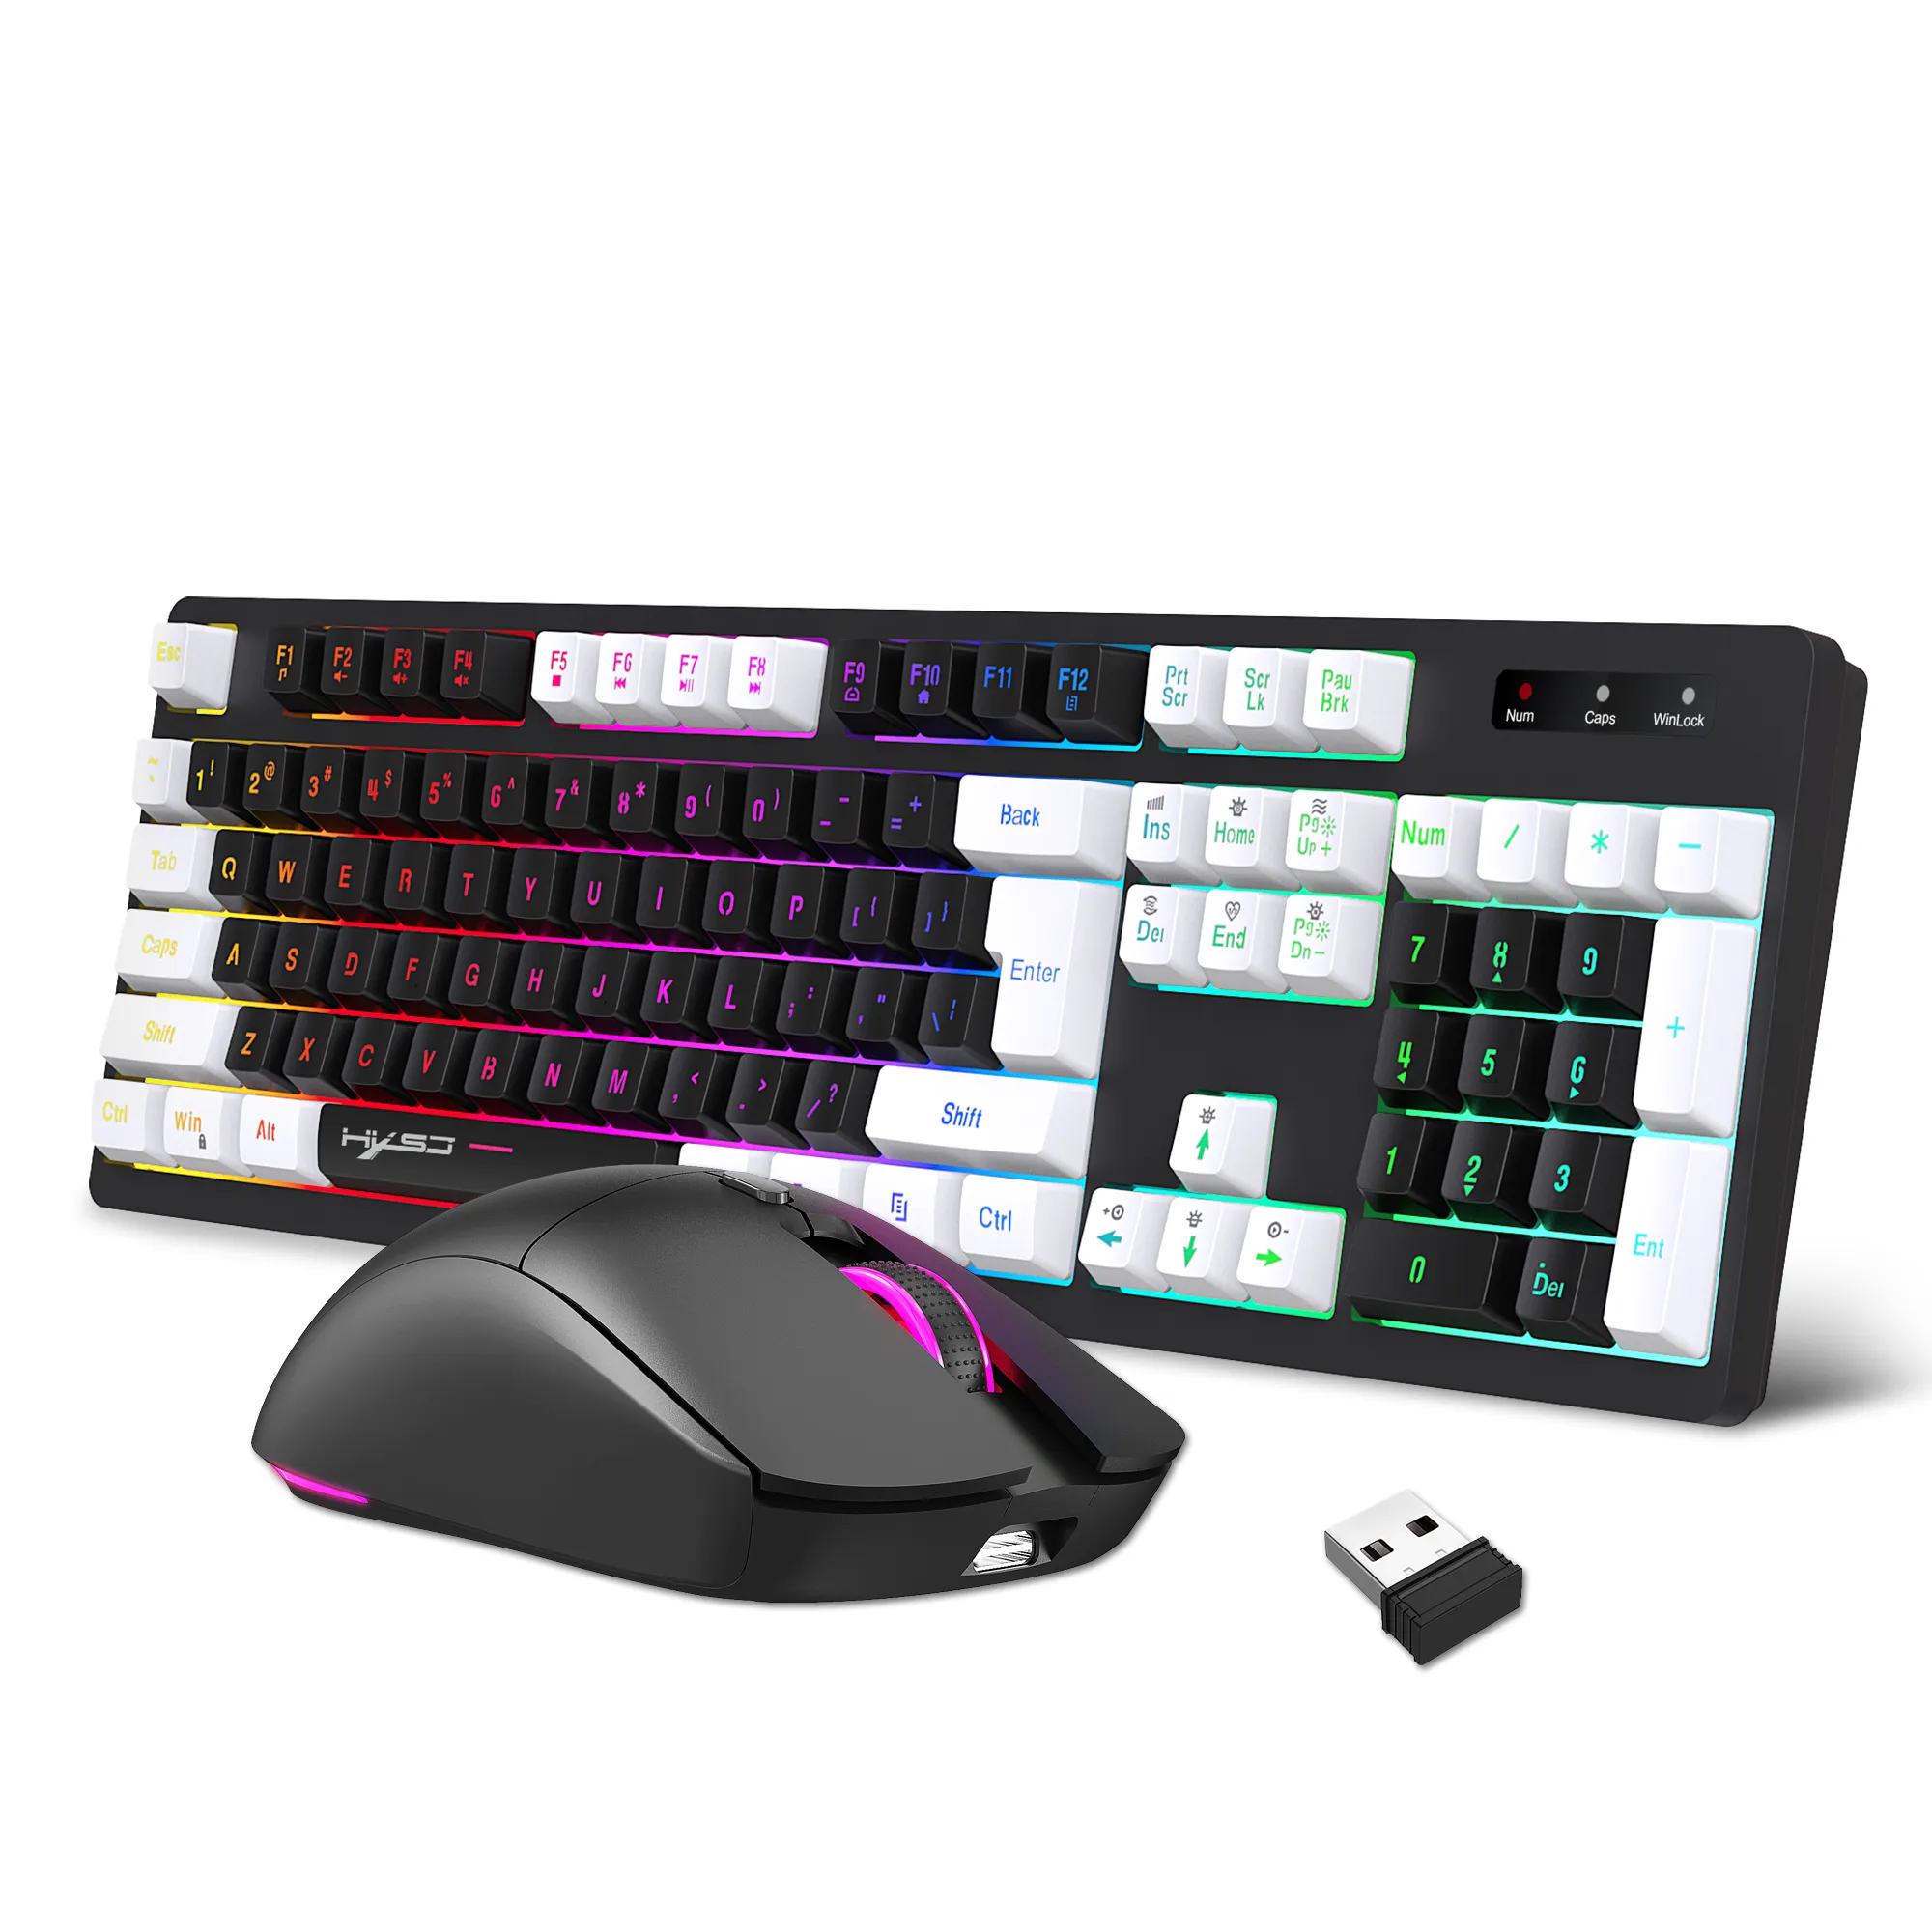 L98 Wireless Keyboard Mouse Set Rechargeable 2.4G Colorful Gaming RGB Backlit